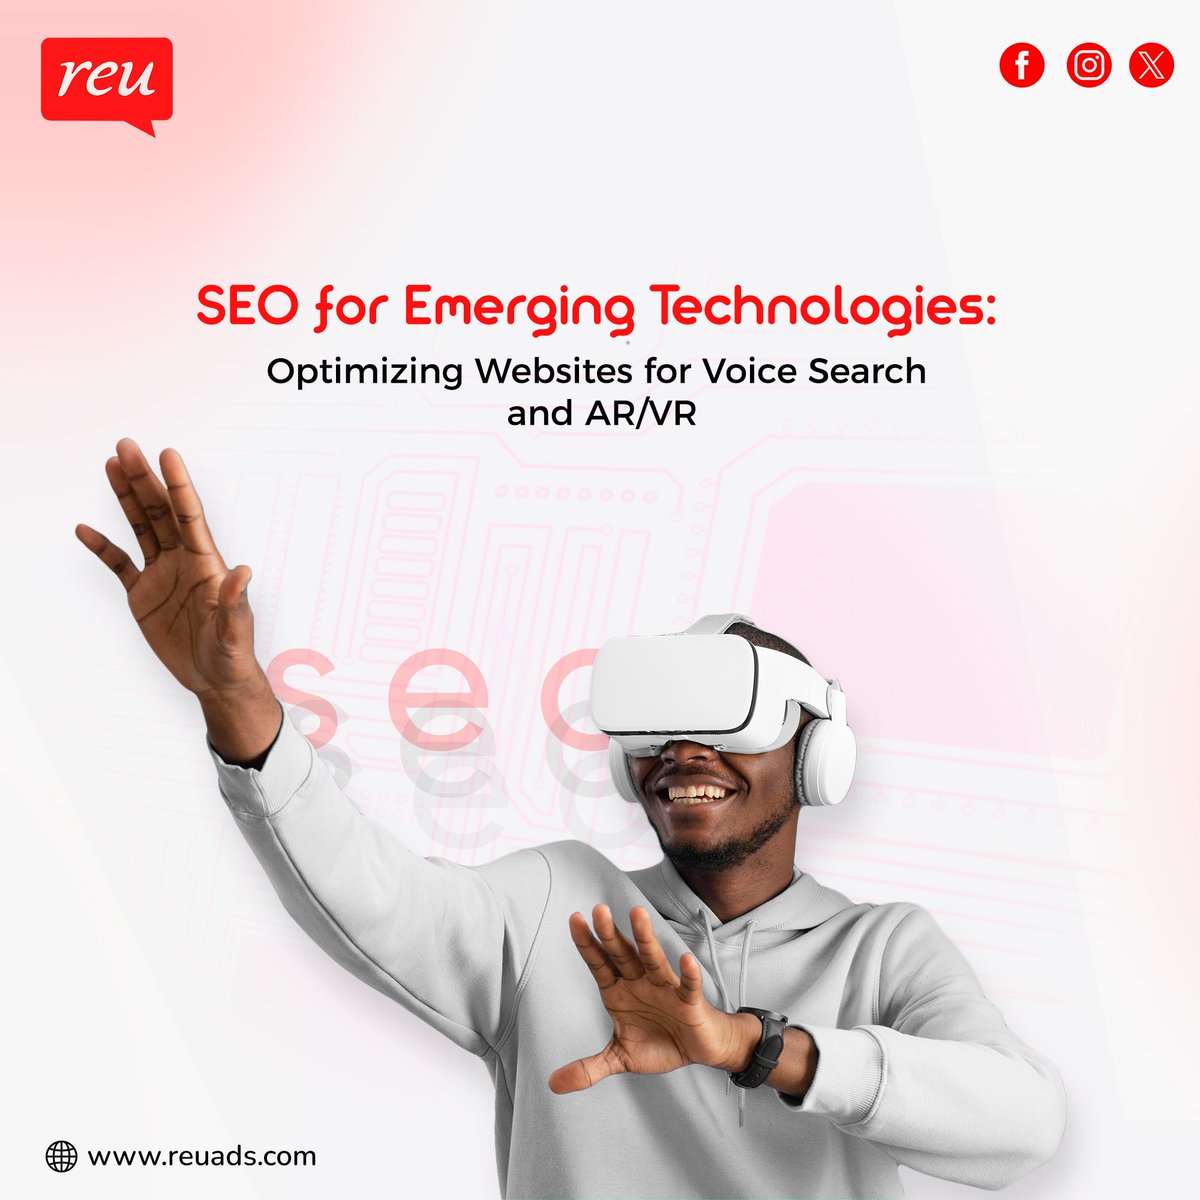 #SEO meets #EmergingTech! Learn to master voice search & AR/VR optimization in this concise guide. #SEO #EmergingTech #VoiceSearch #AR #VR #Optimization #DigitalMarketing #ReuAds #Onlineadvertising